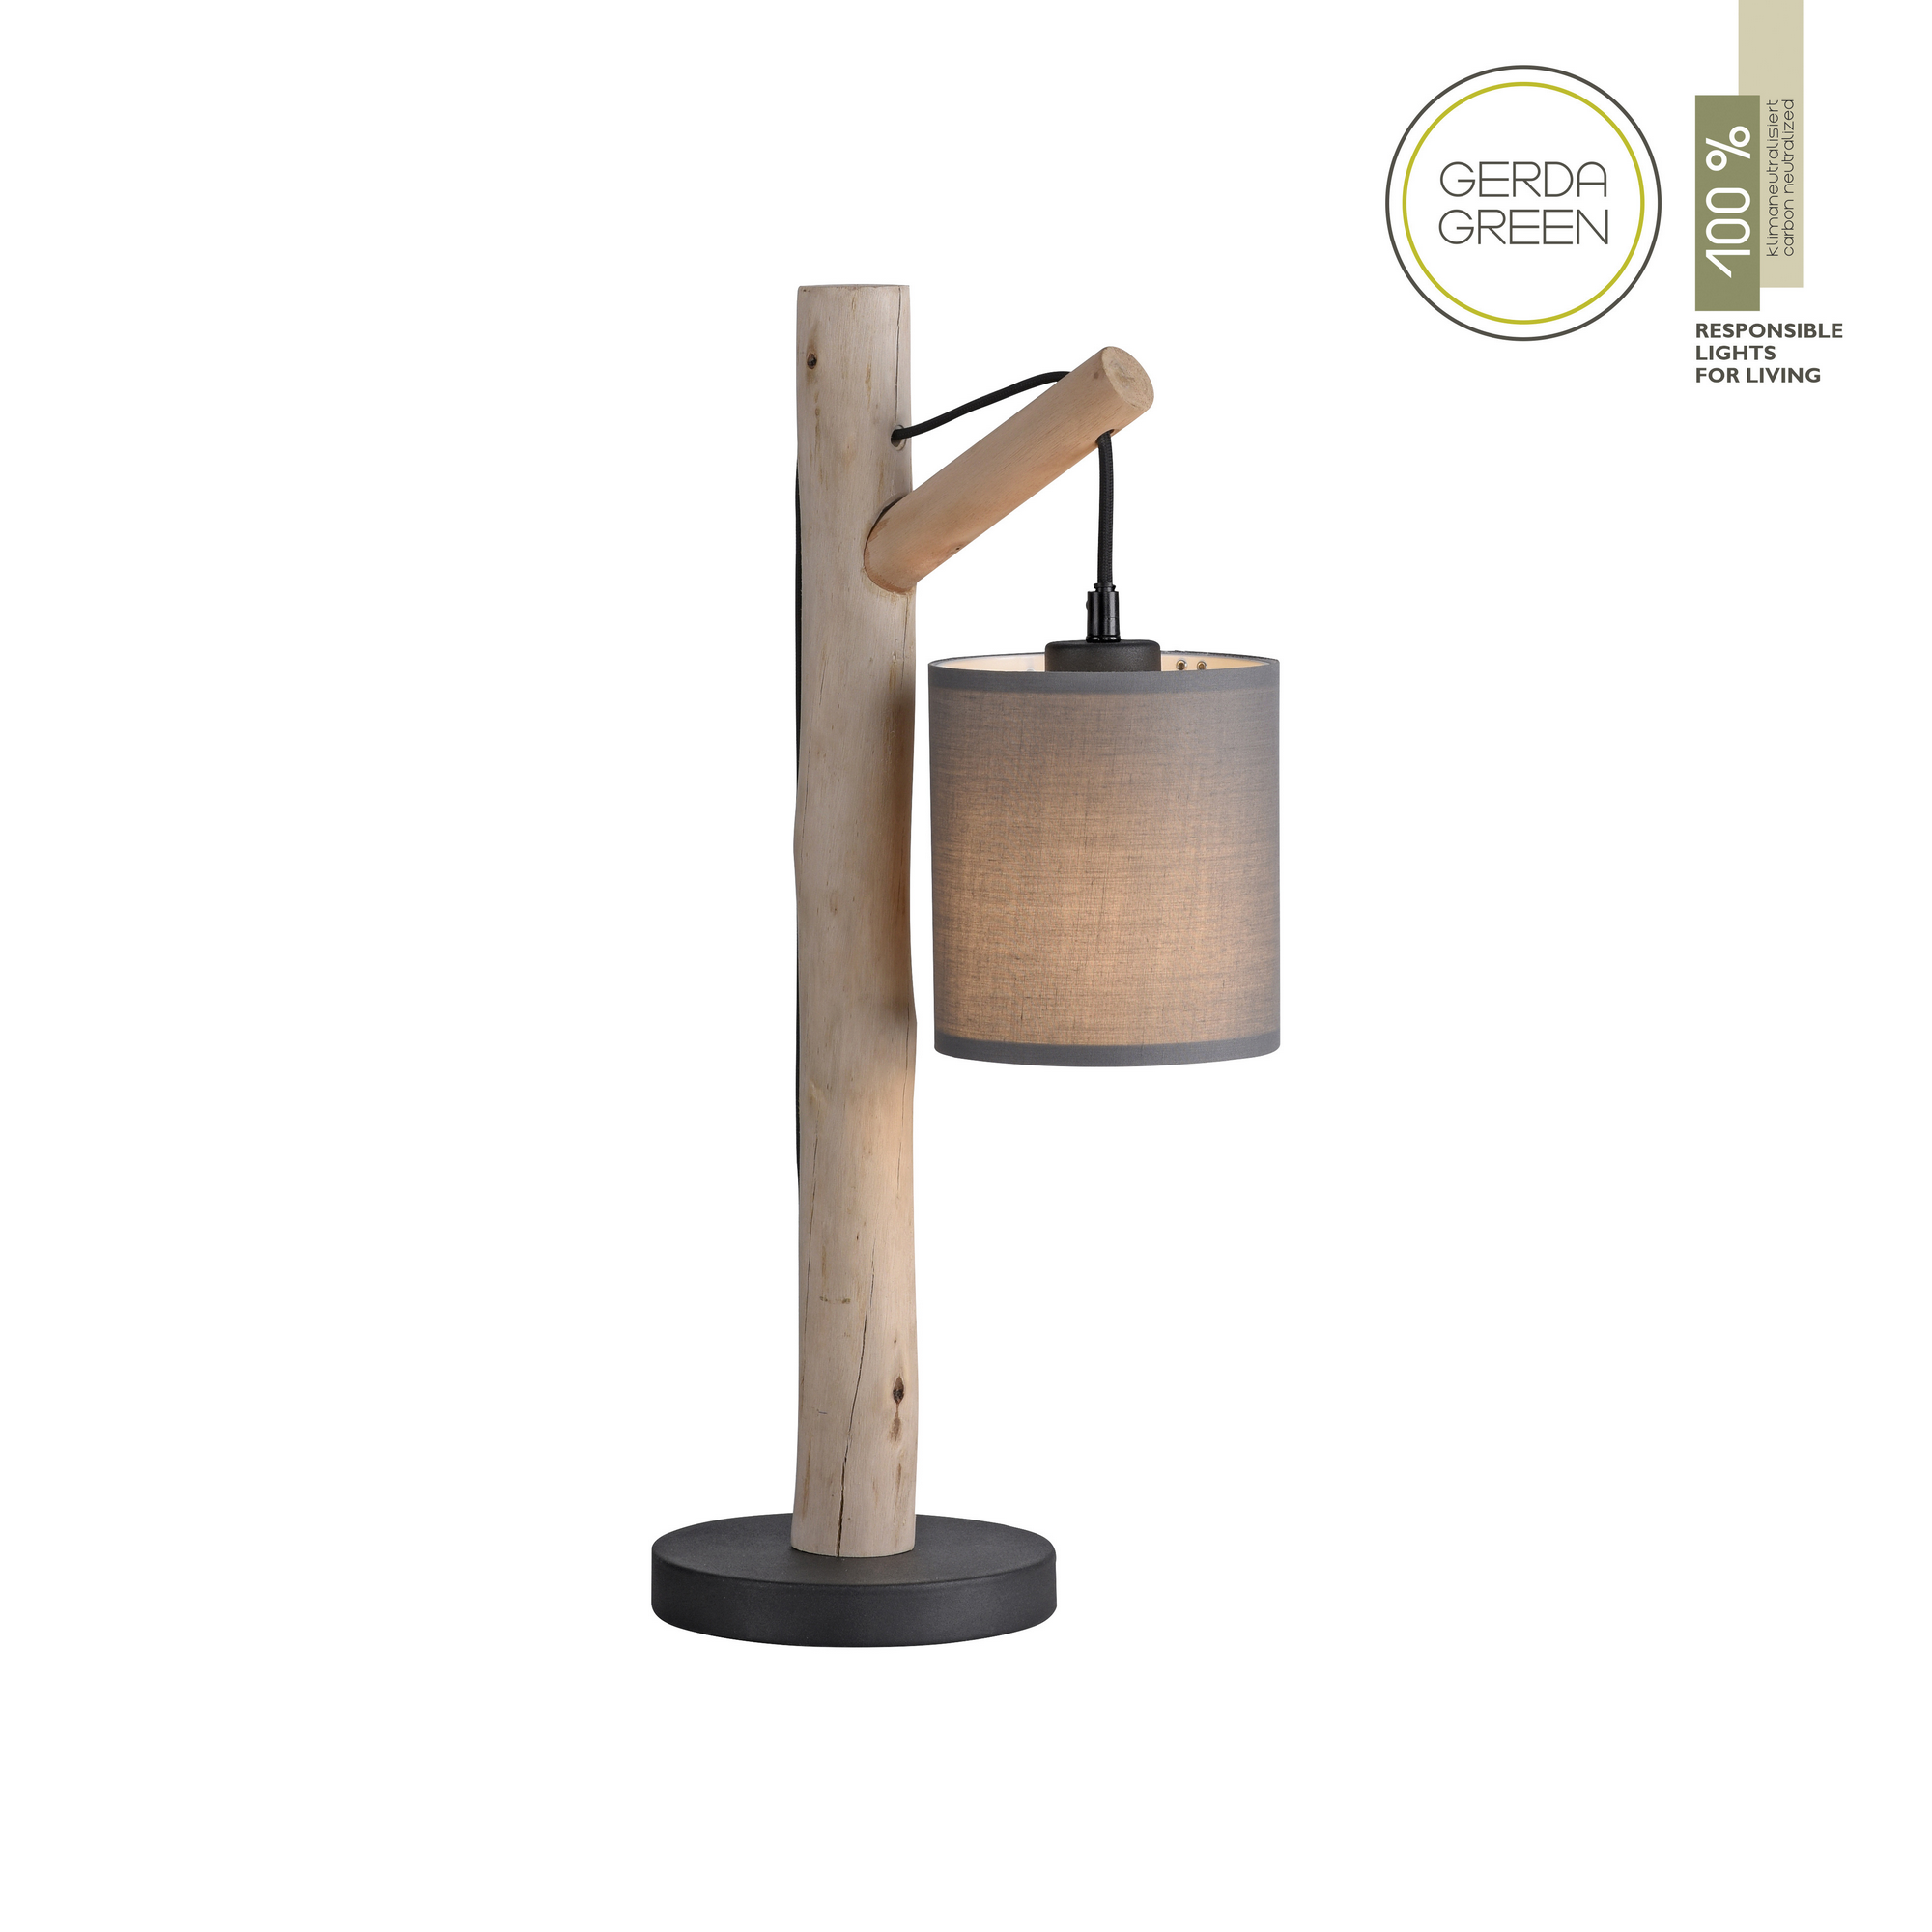 LED-Tischleuchte 'Green Tribu' taupe 16 x 52,5 x 26,5 cm + product picture